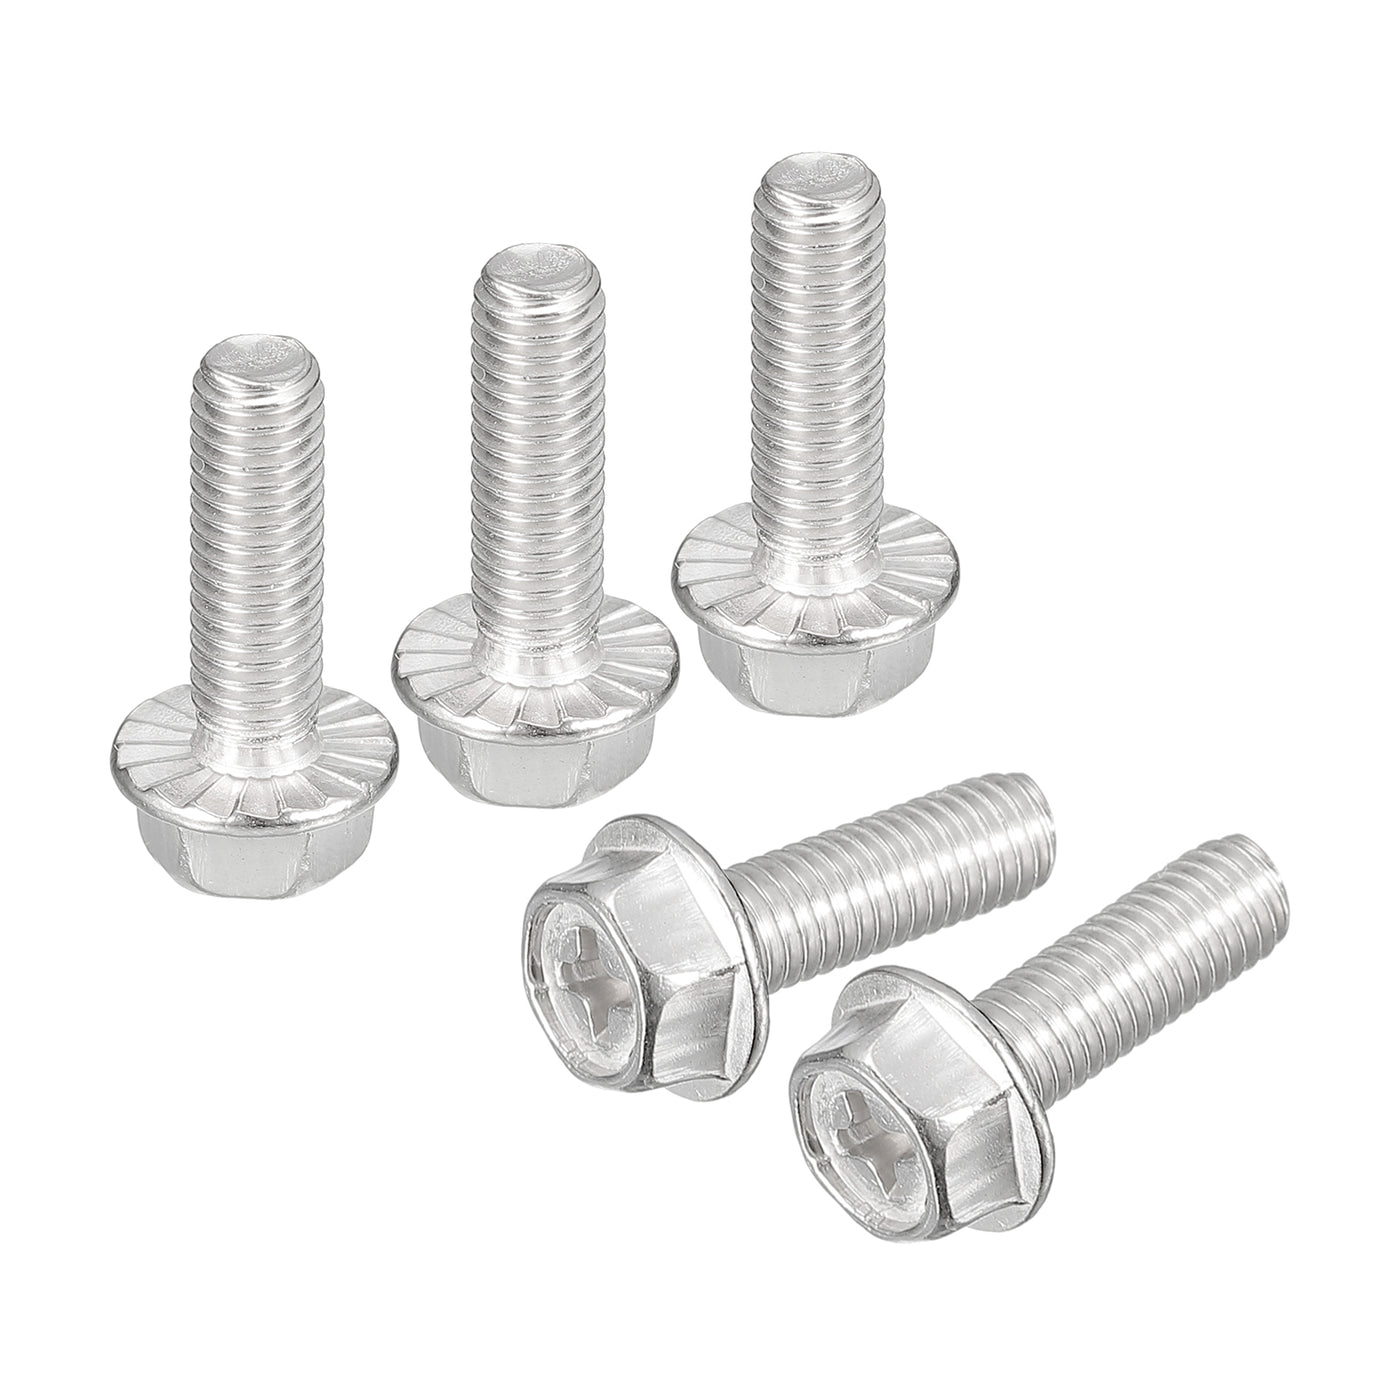 uxcell Uxcell M5x16mm Phillips Hex Head Flange Bolts, 10pcs 304 Stainless Steel Screws